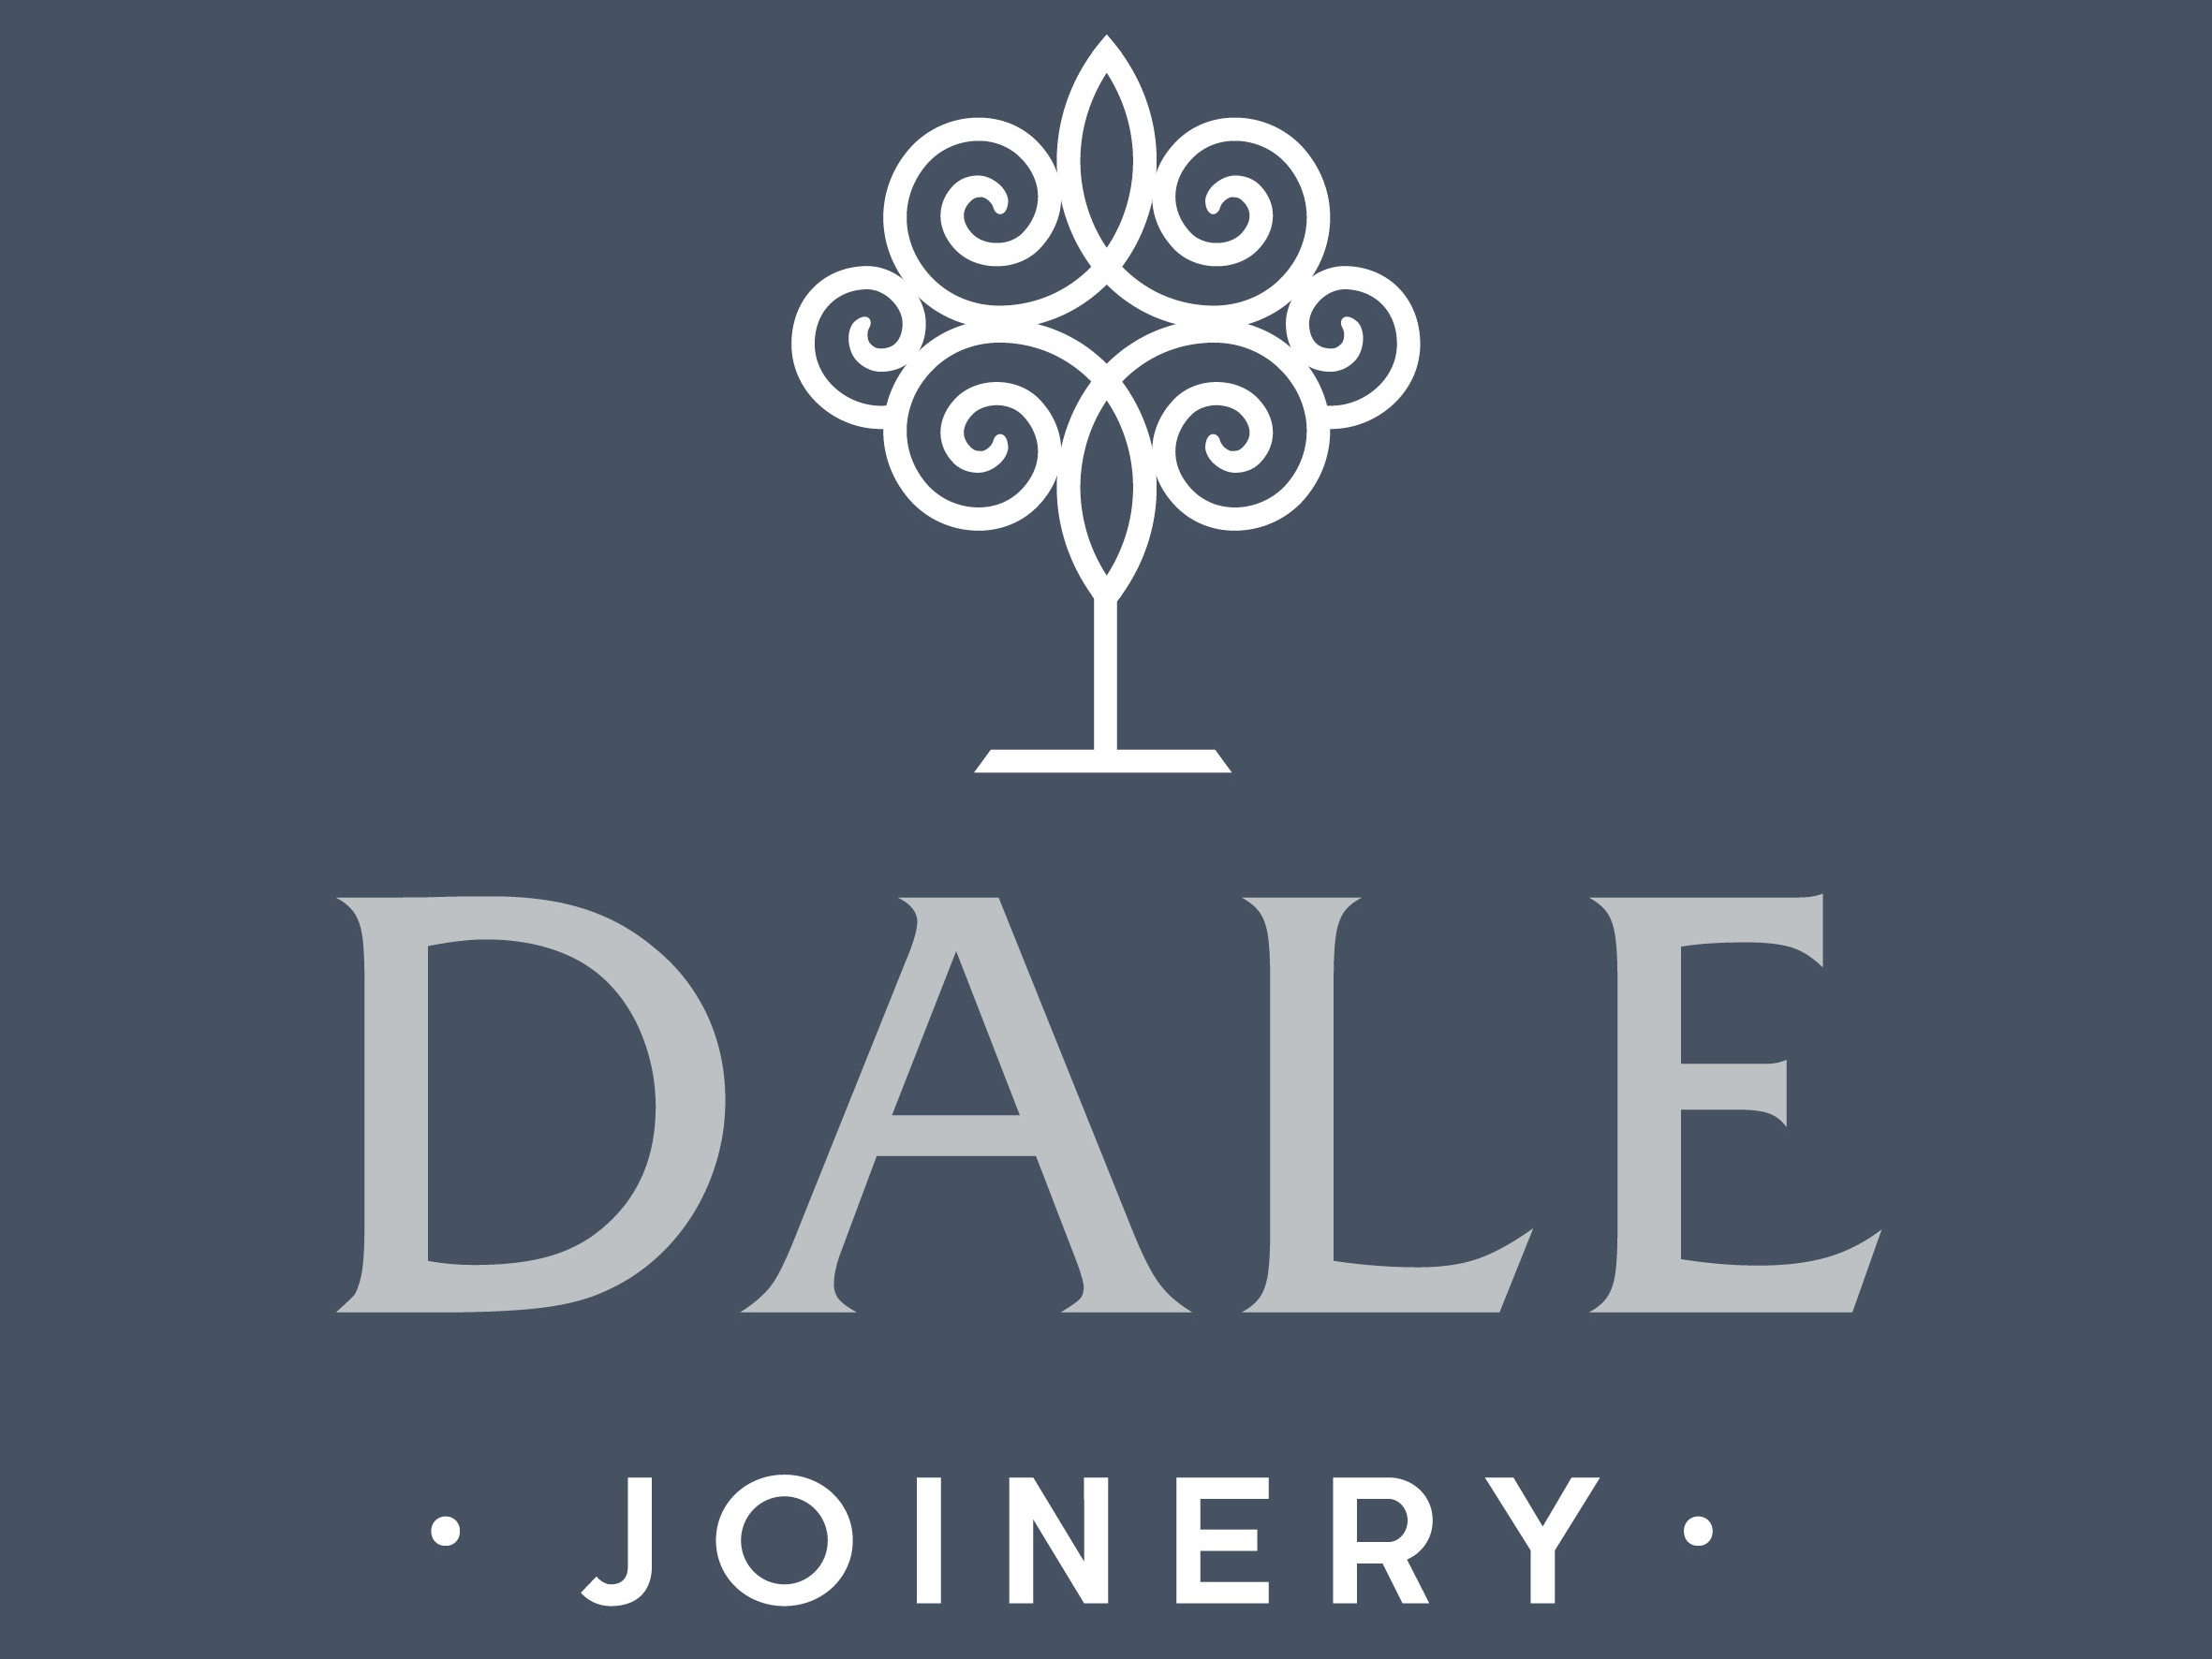 Dale Joinery Limited